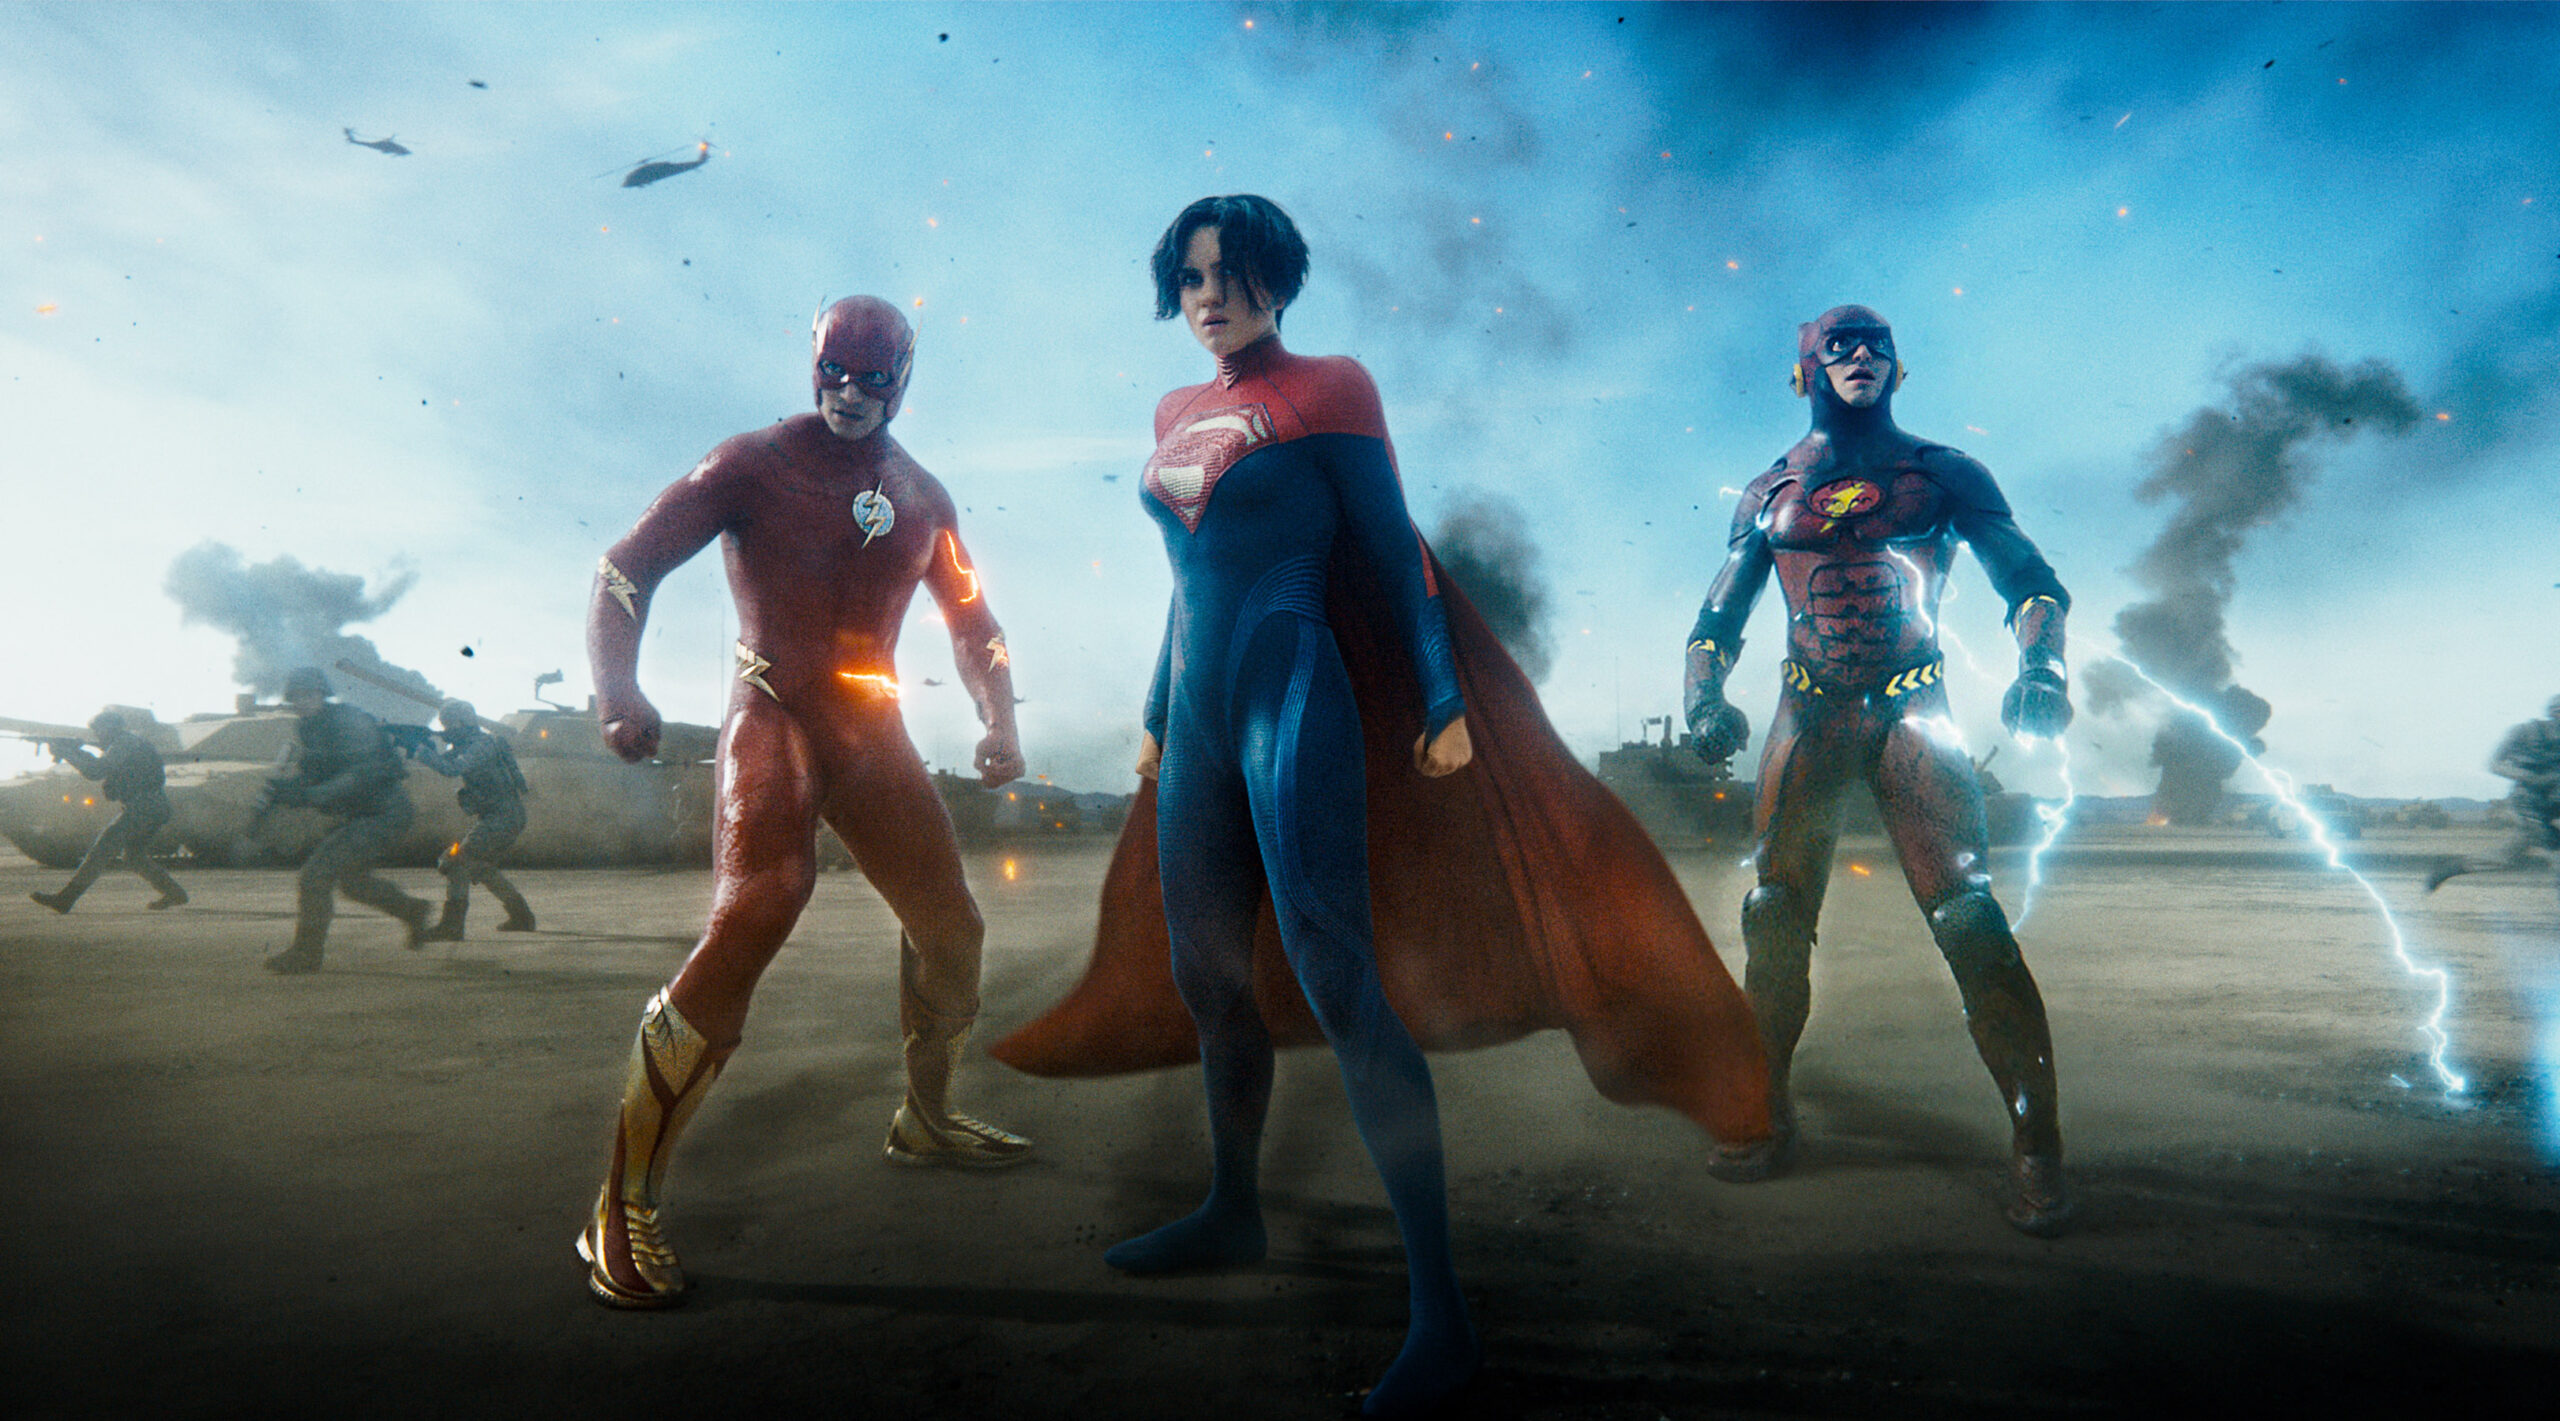 Opening Weekend Box Office For The Flash Lower Than Black Adam – Ouch